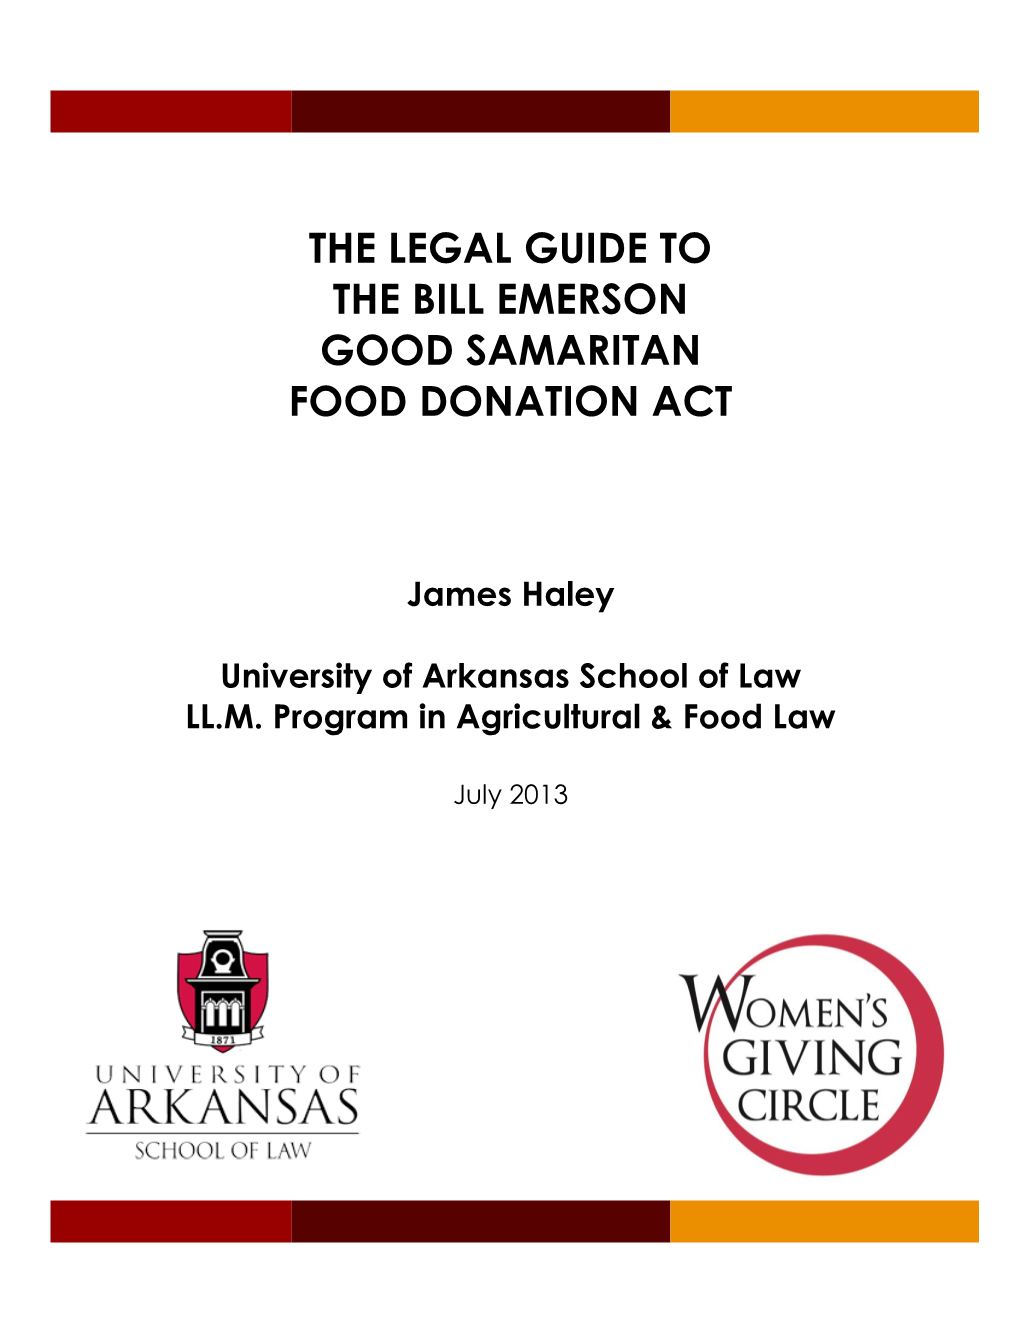 The Legal Guide to the Bill Emerson Good Samaritan Food Donation Act